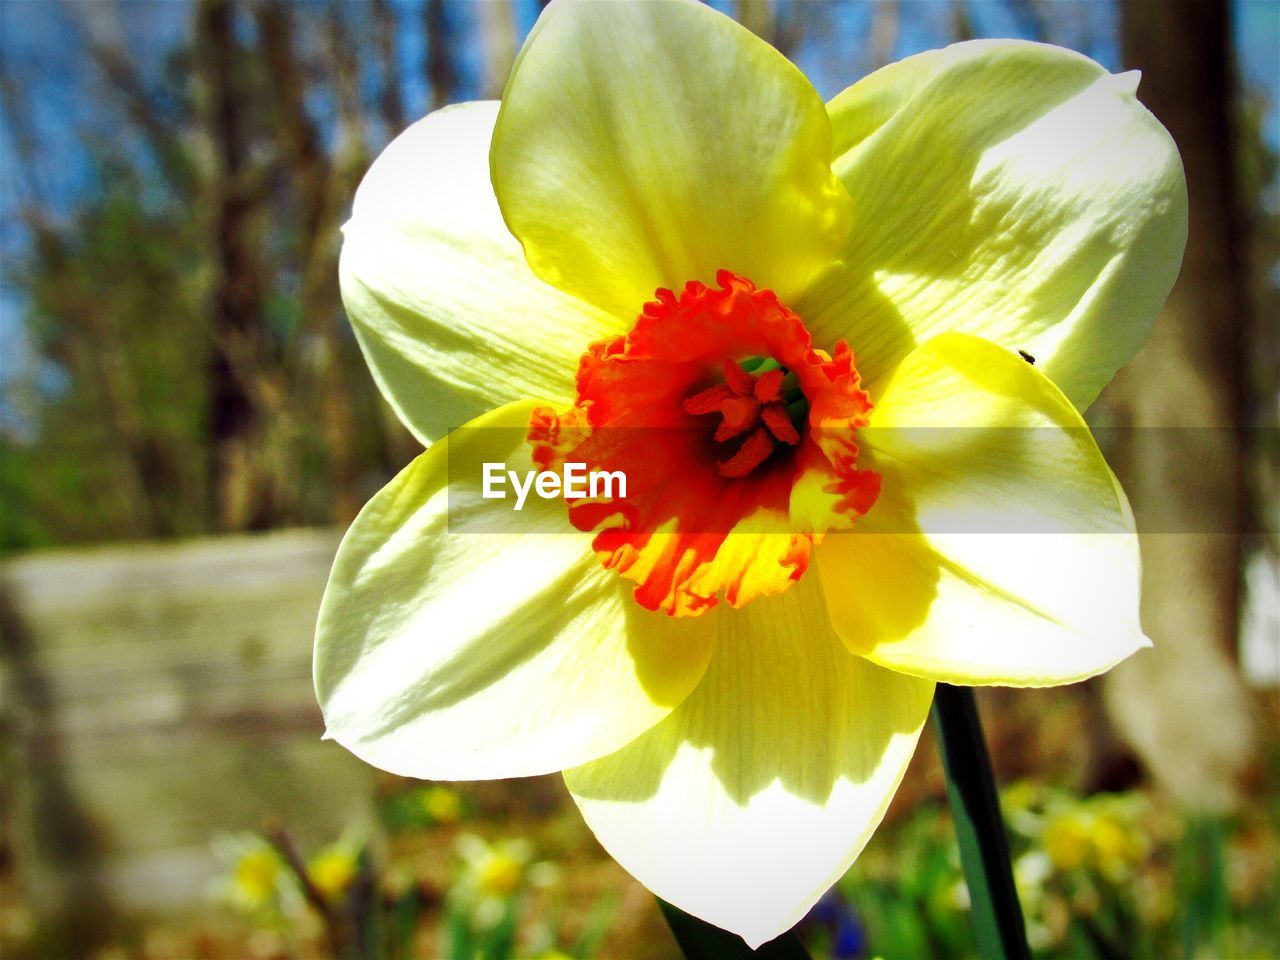 Close up view of daffodil